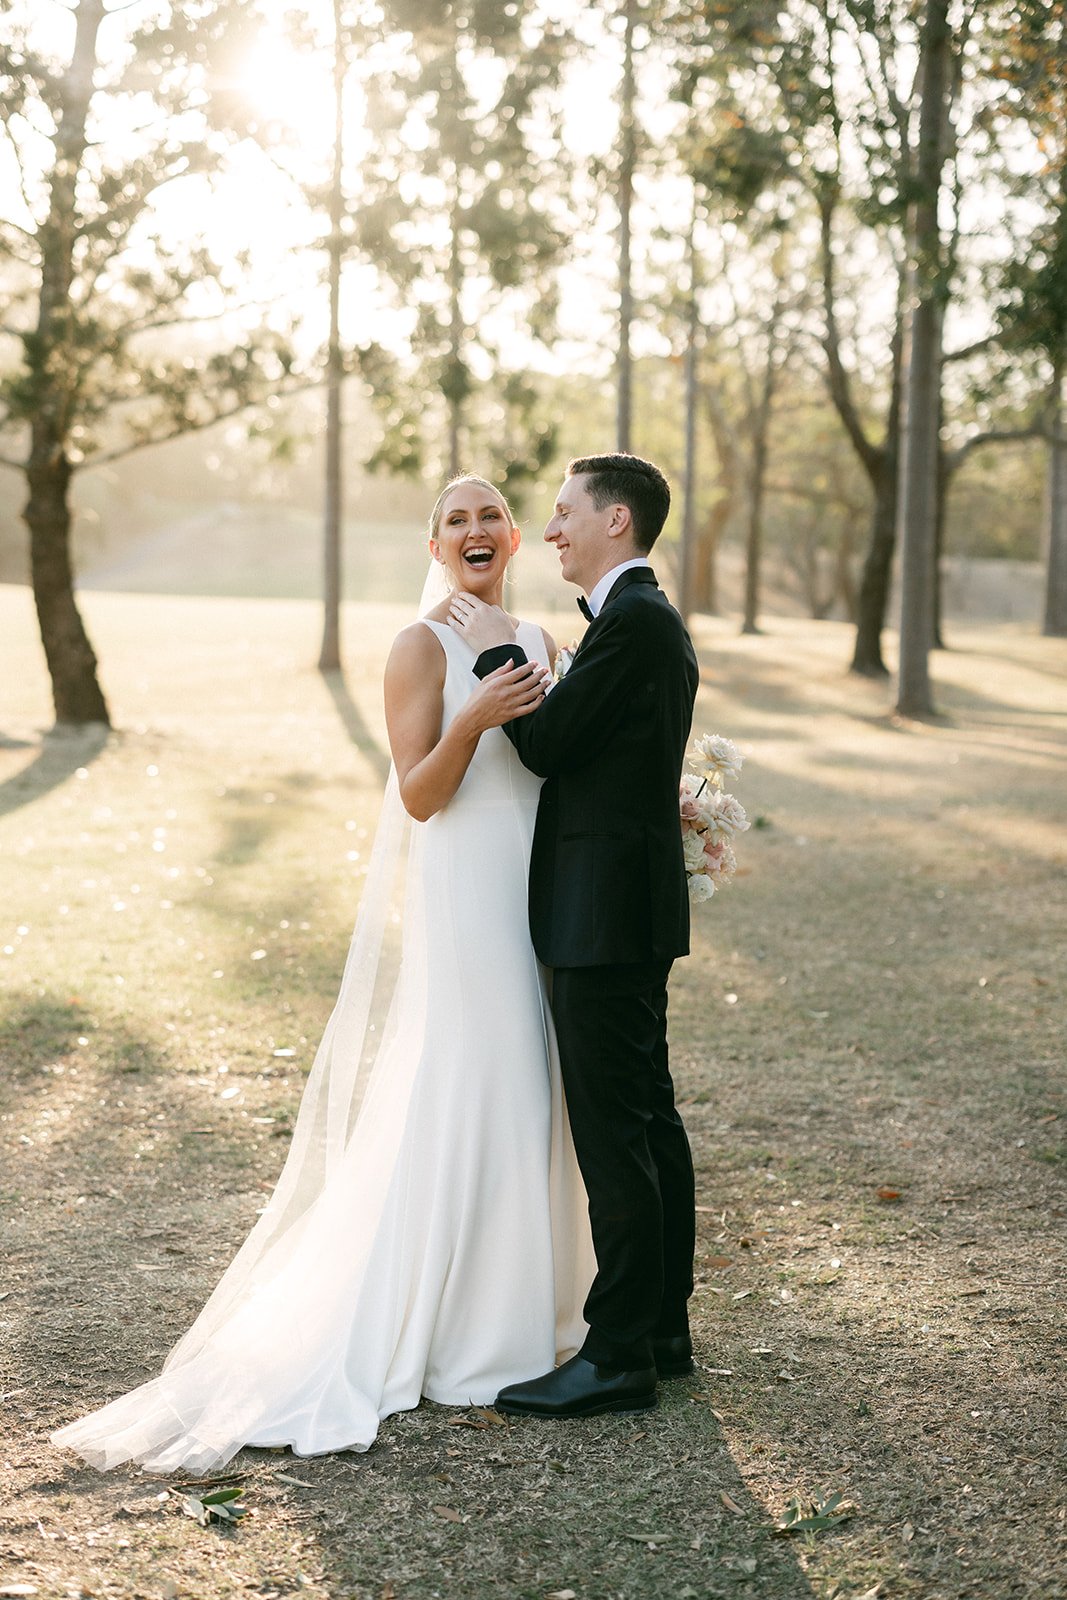 A bride and groom are drenched in afternoon golden sunlight and they laugh. The grooms hand is sitting gently on the brides cheek